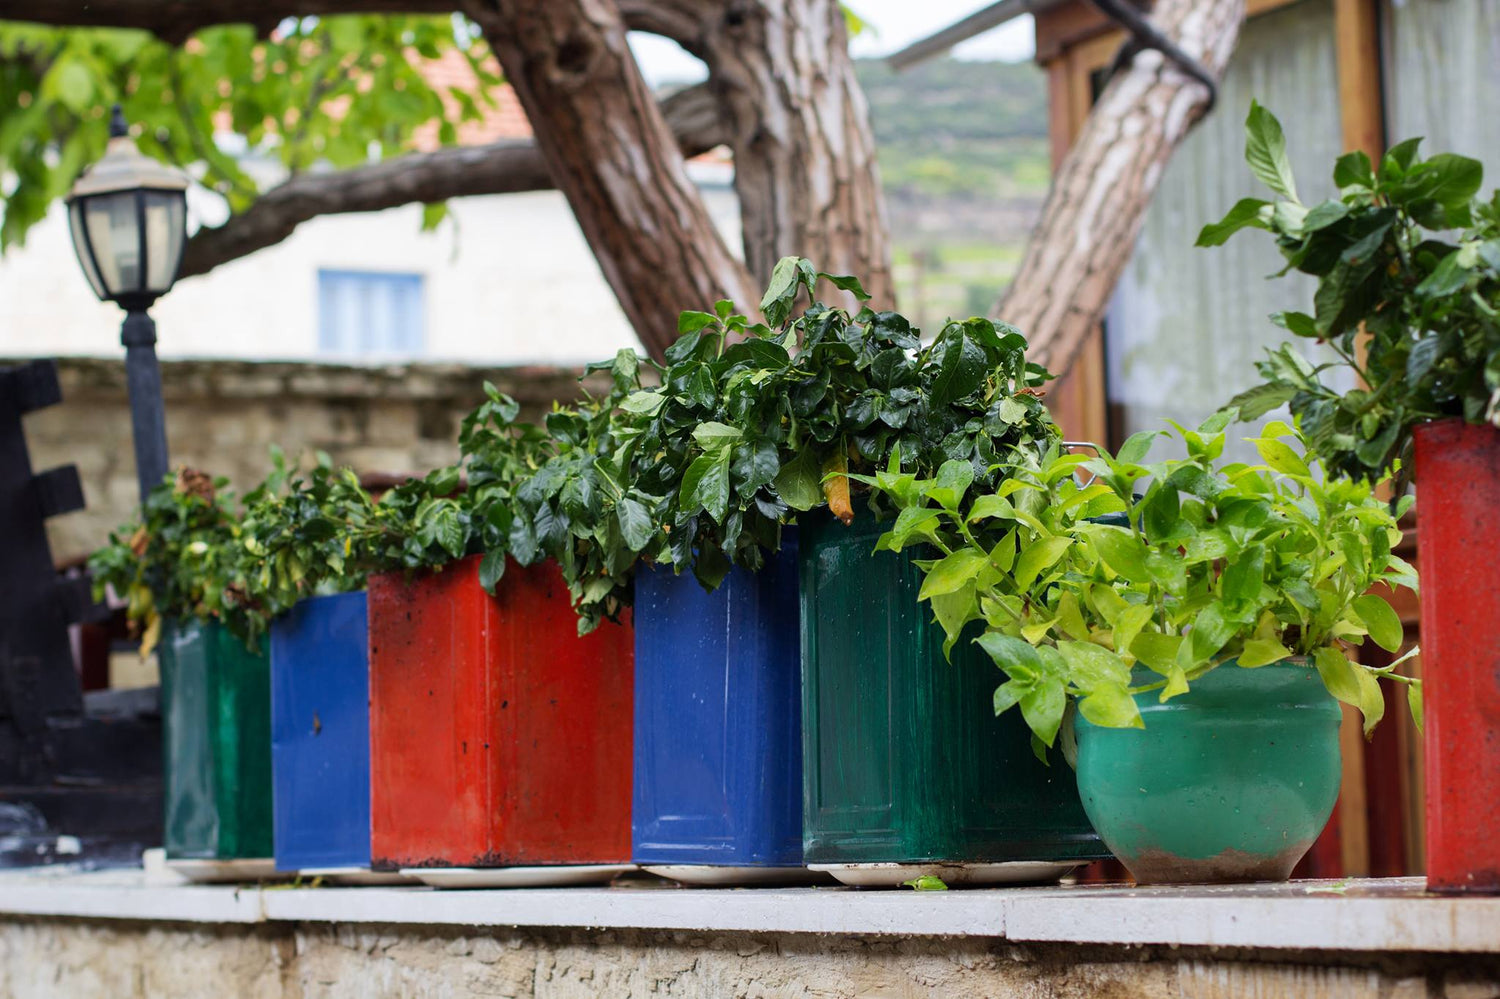 A row of planters on a garden wall.